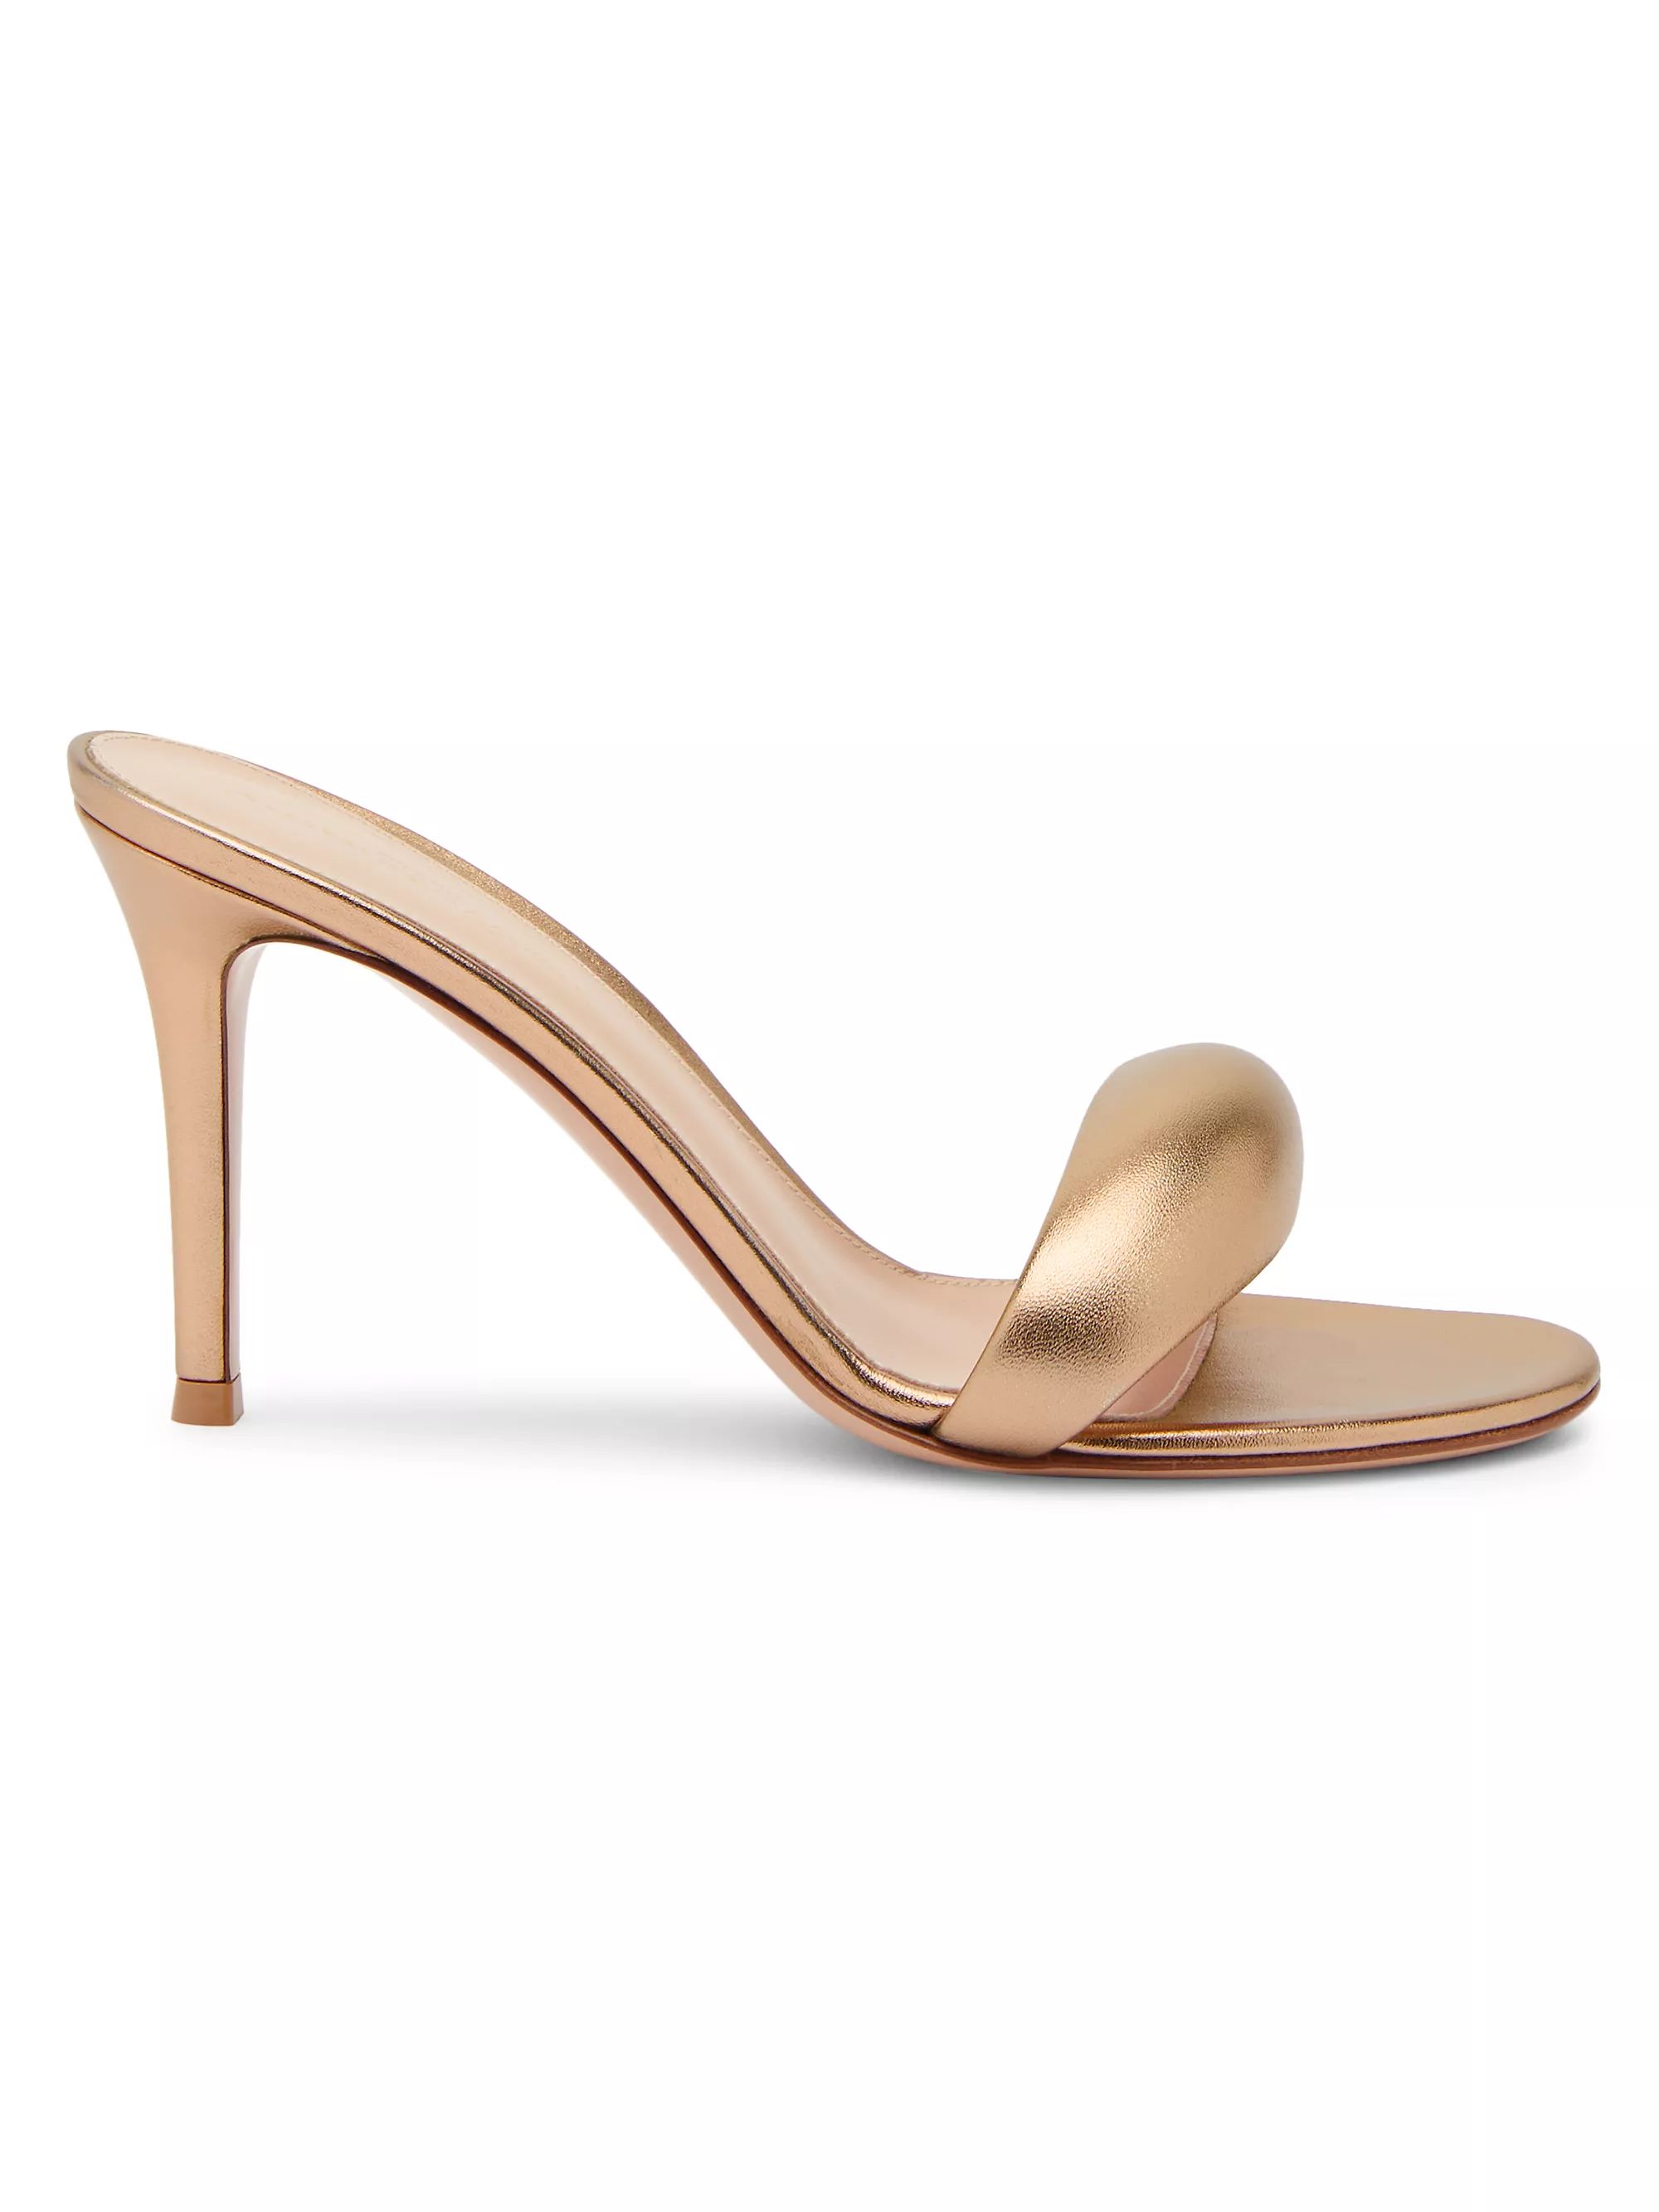 Shop Gianvito Rossi Bijoux 85MM Leather Mules | Saks Fifth Avenue | Saks Fifth Avenue